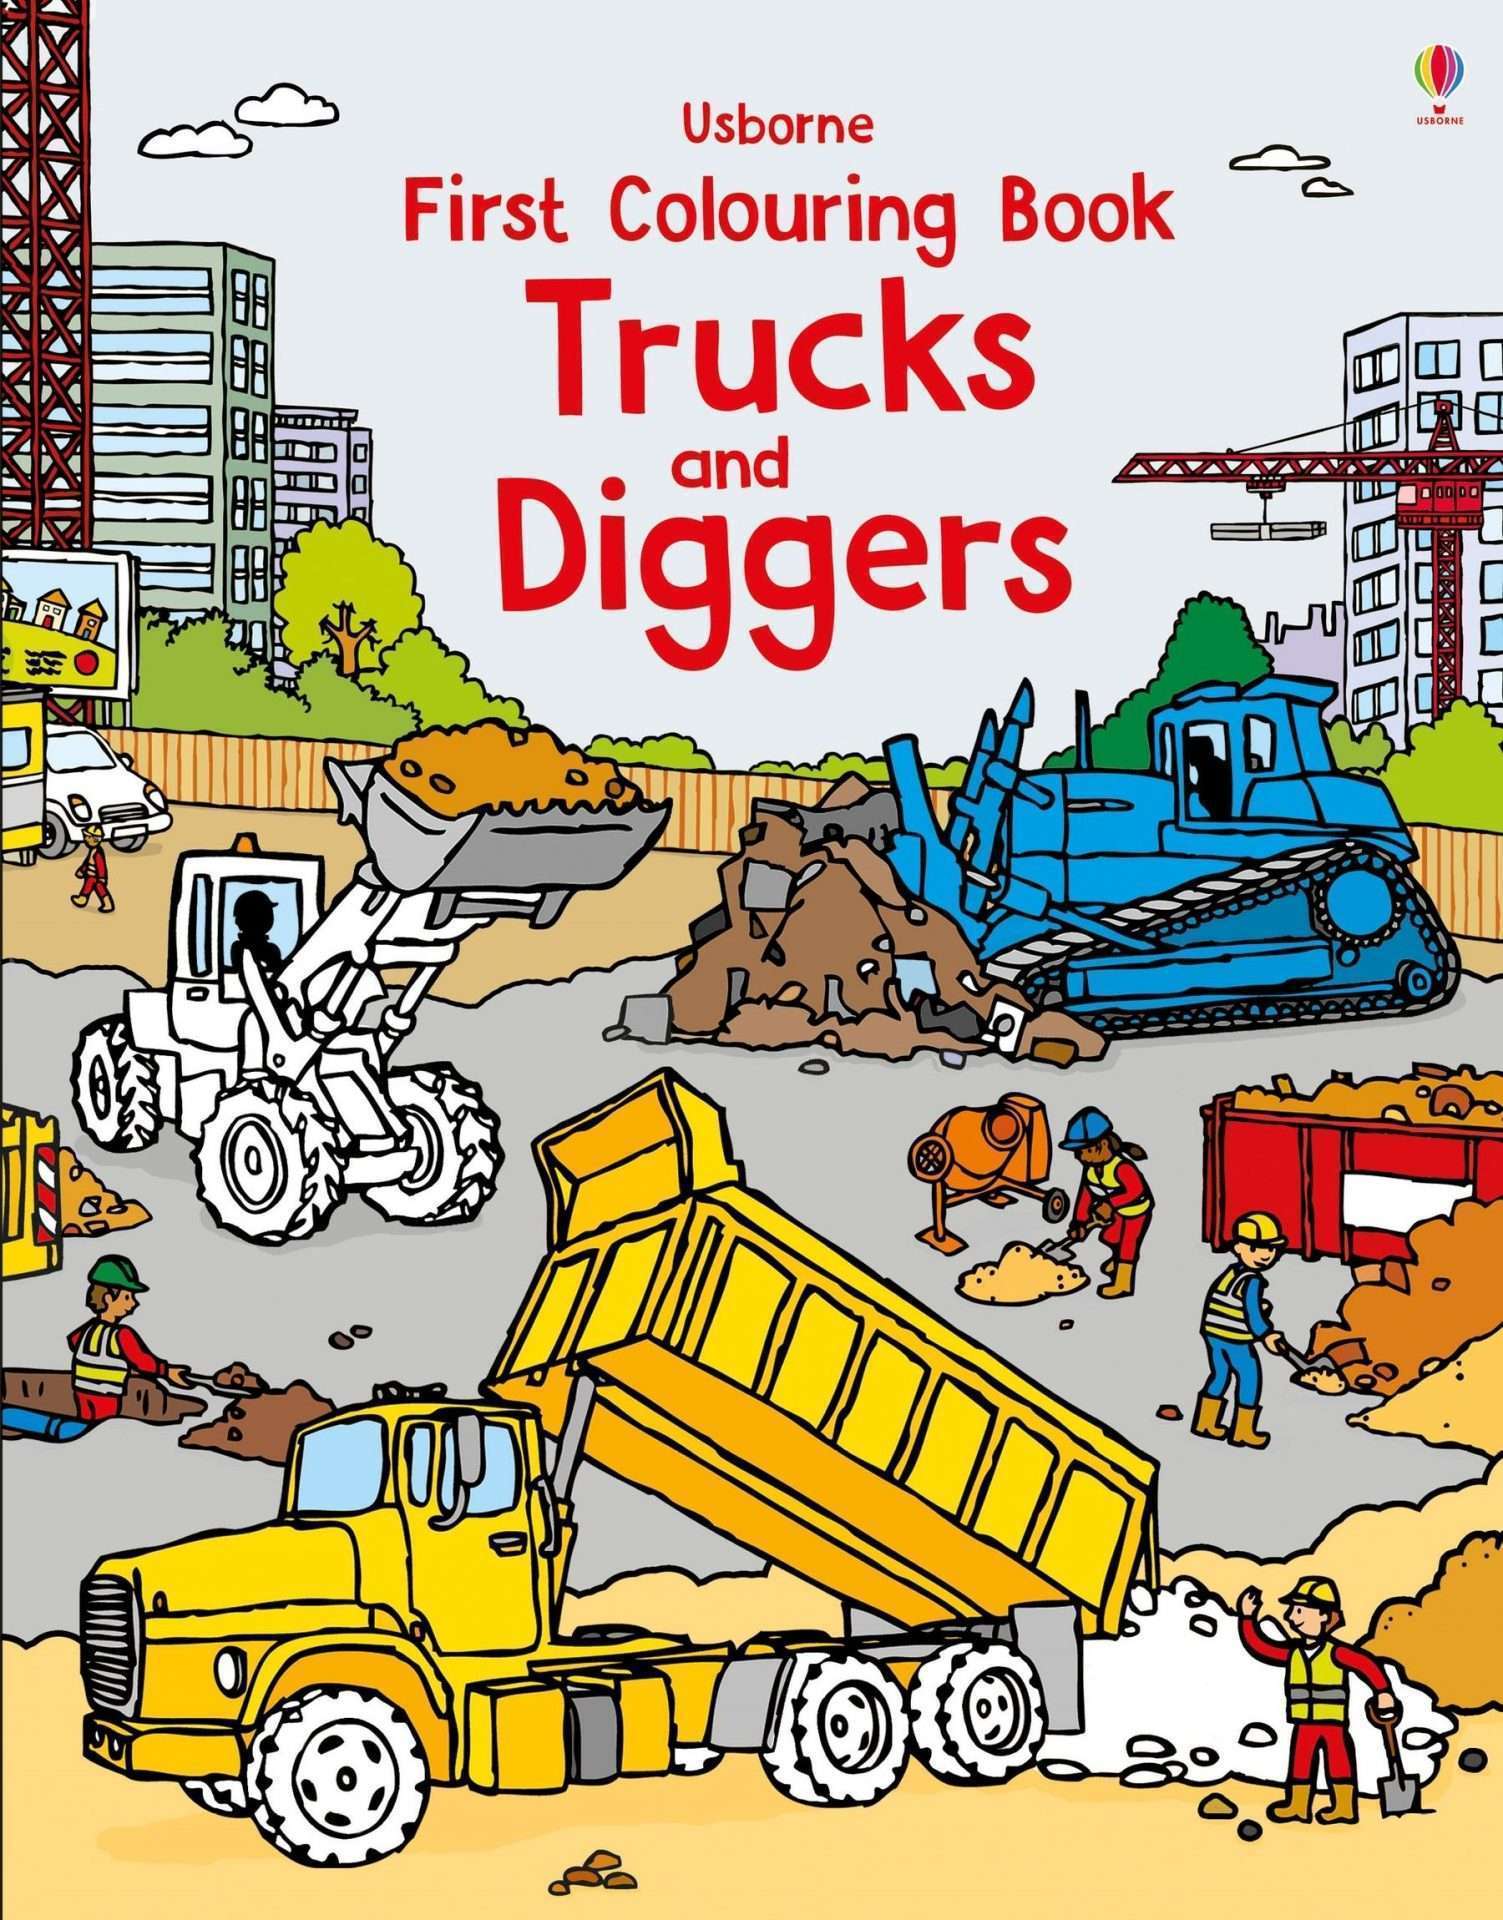 First Colouring Book: Trucks and Diggers